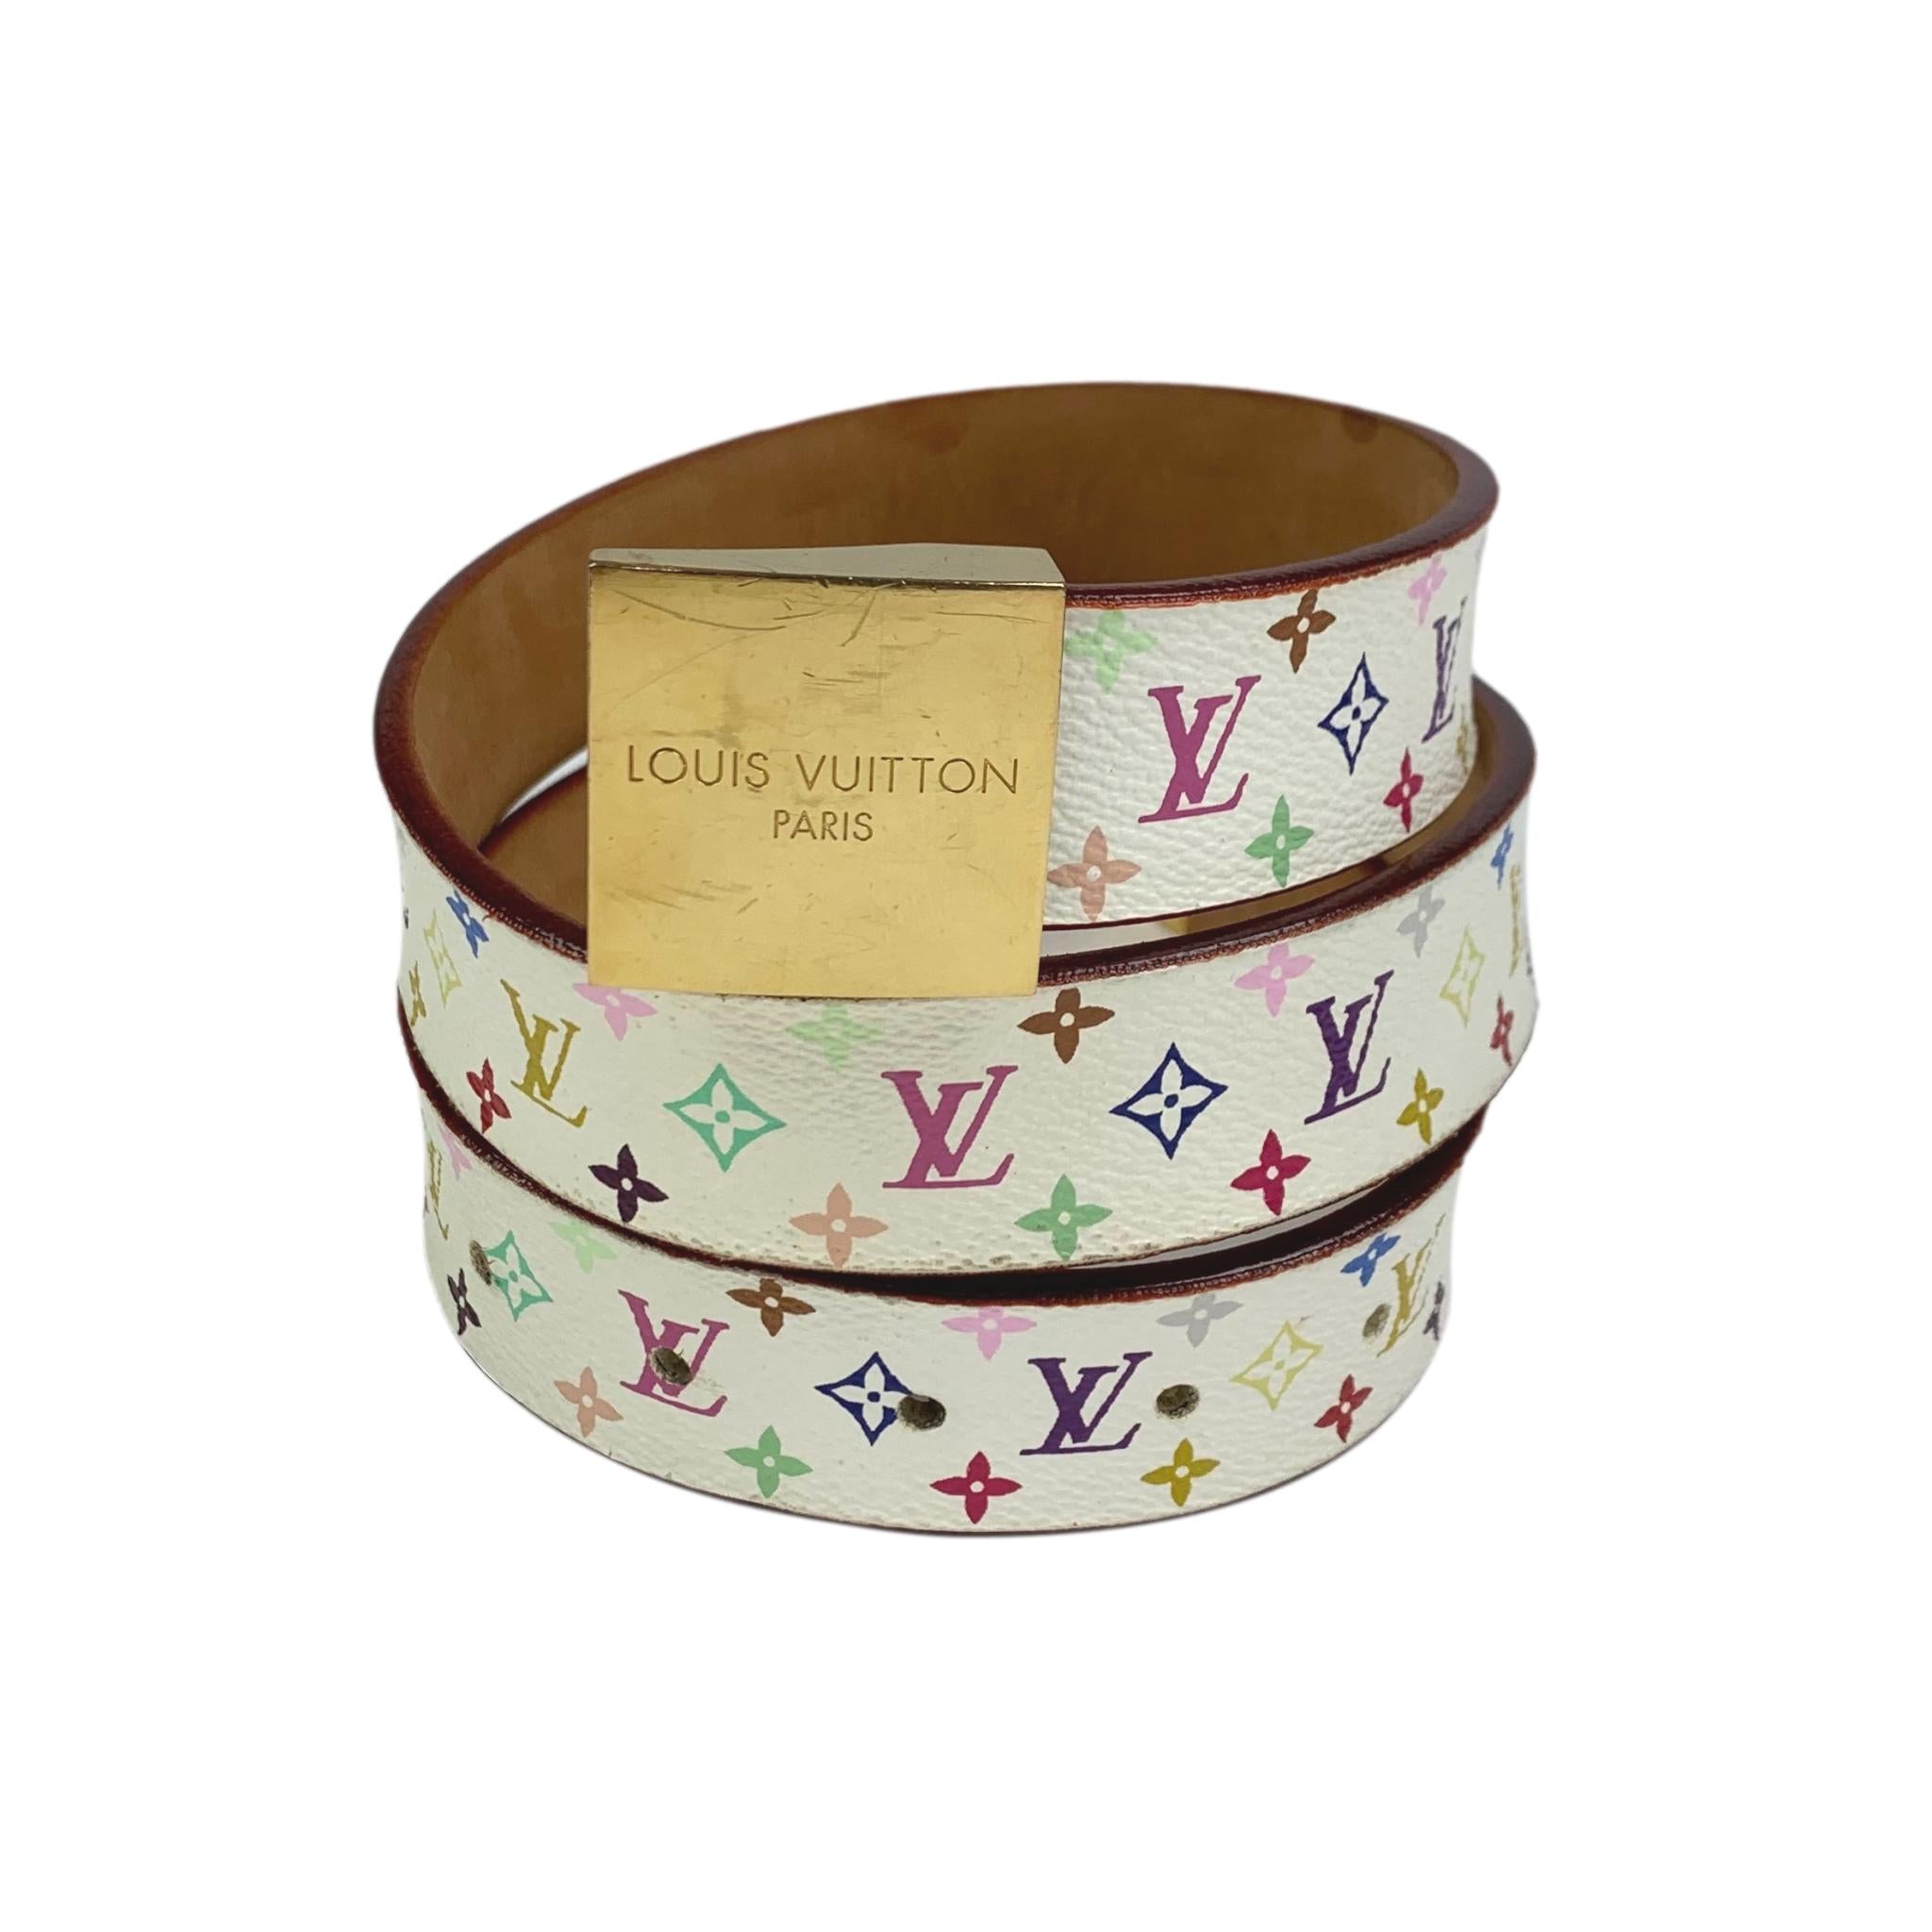 Louis Vuitton Murakami custom belt made from collaboration bag By Designed  By AC